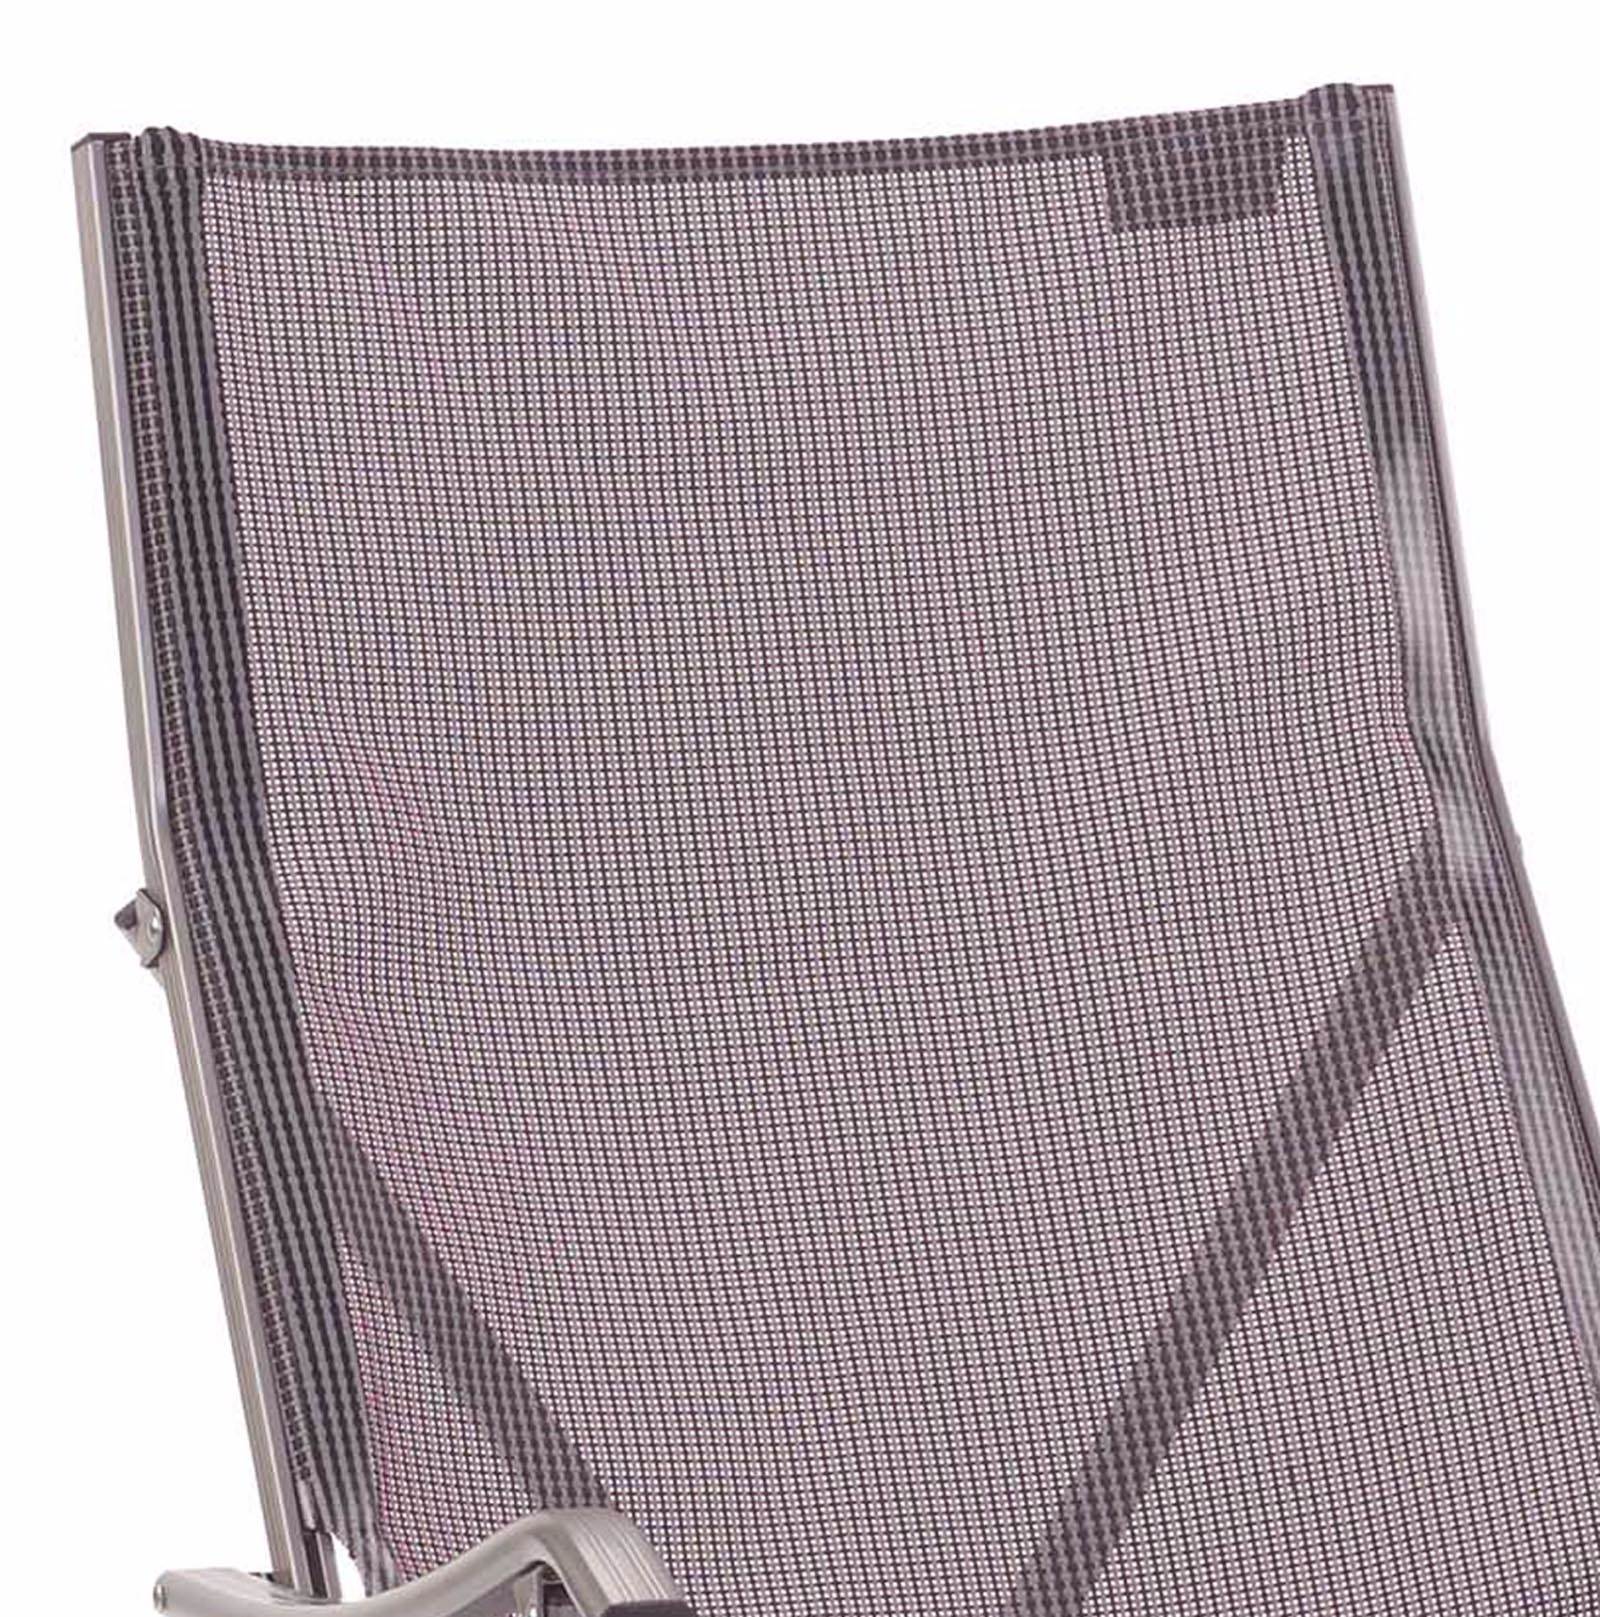 Coleman Patio Weather-Resistant Adult Sling Chair with Drink Holder, Gray - image 2 of 8